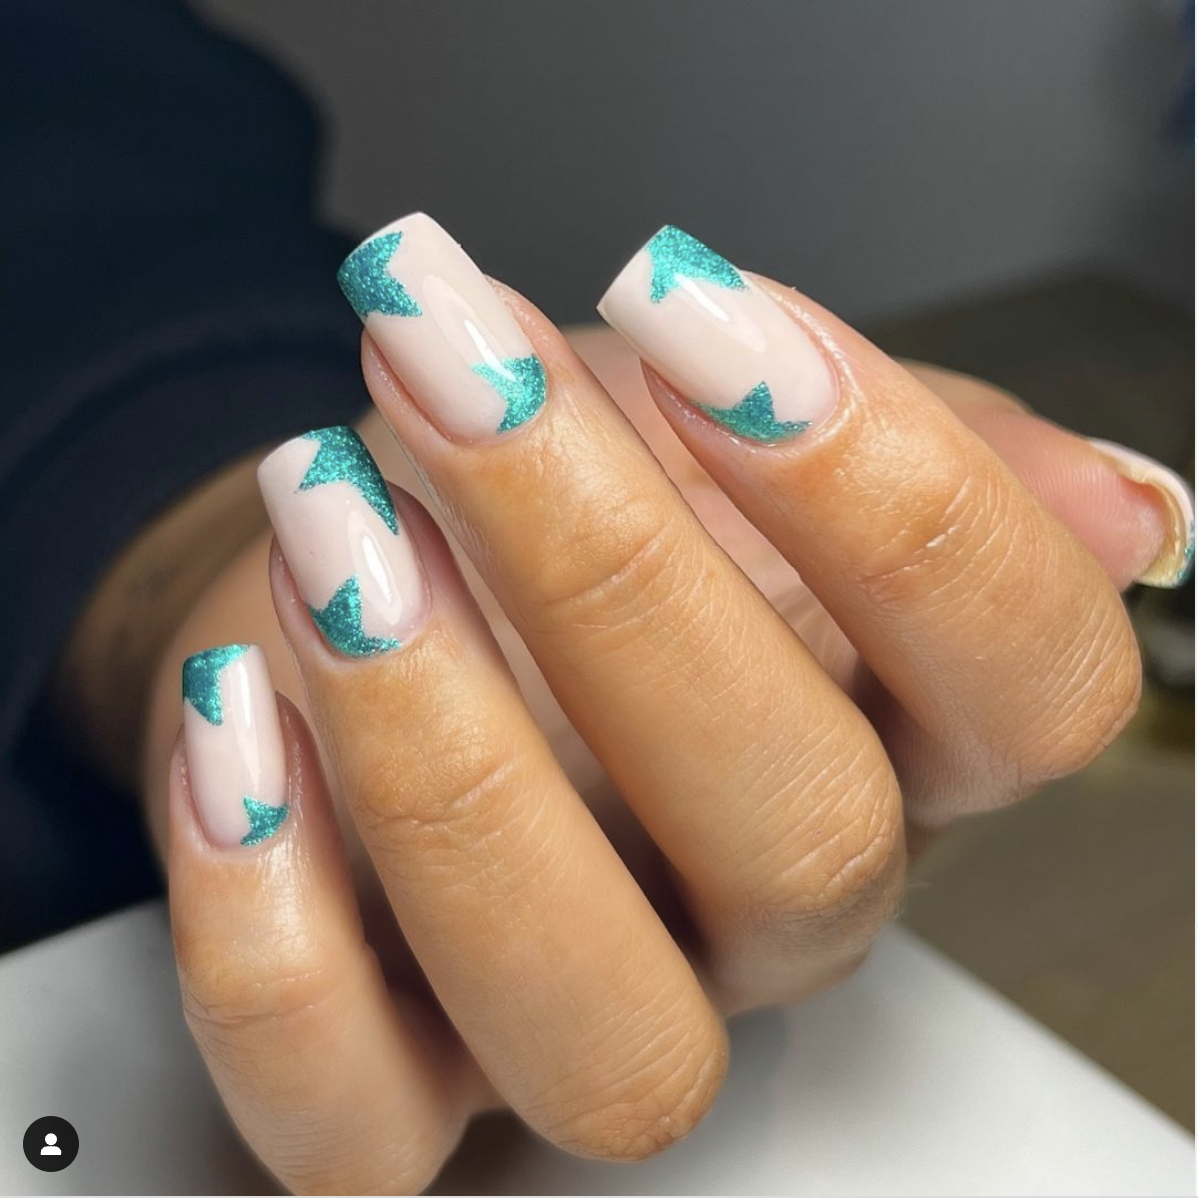 Buy Blue Glittery Chevron French Manicure in Any Shape You Choose Best  Selling Handmade Strong Press on Nails for Woman DIY Nails Online in India  - Etsy